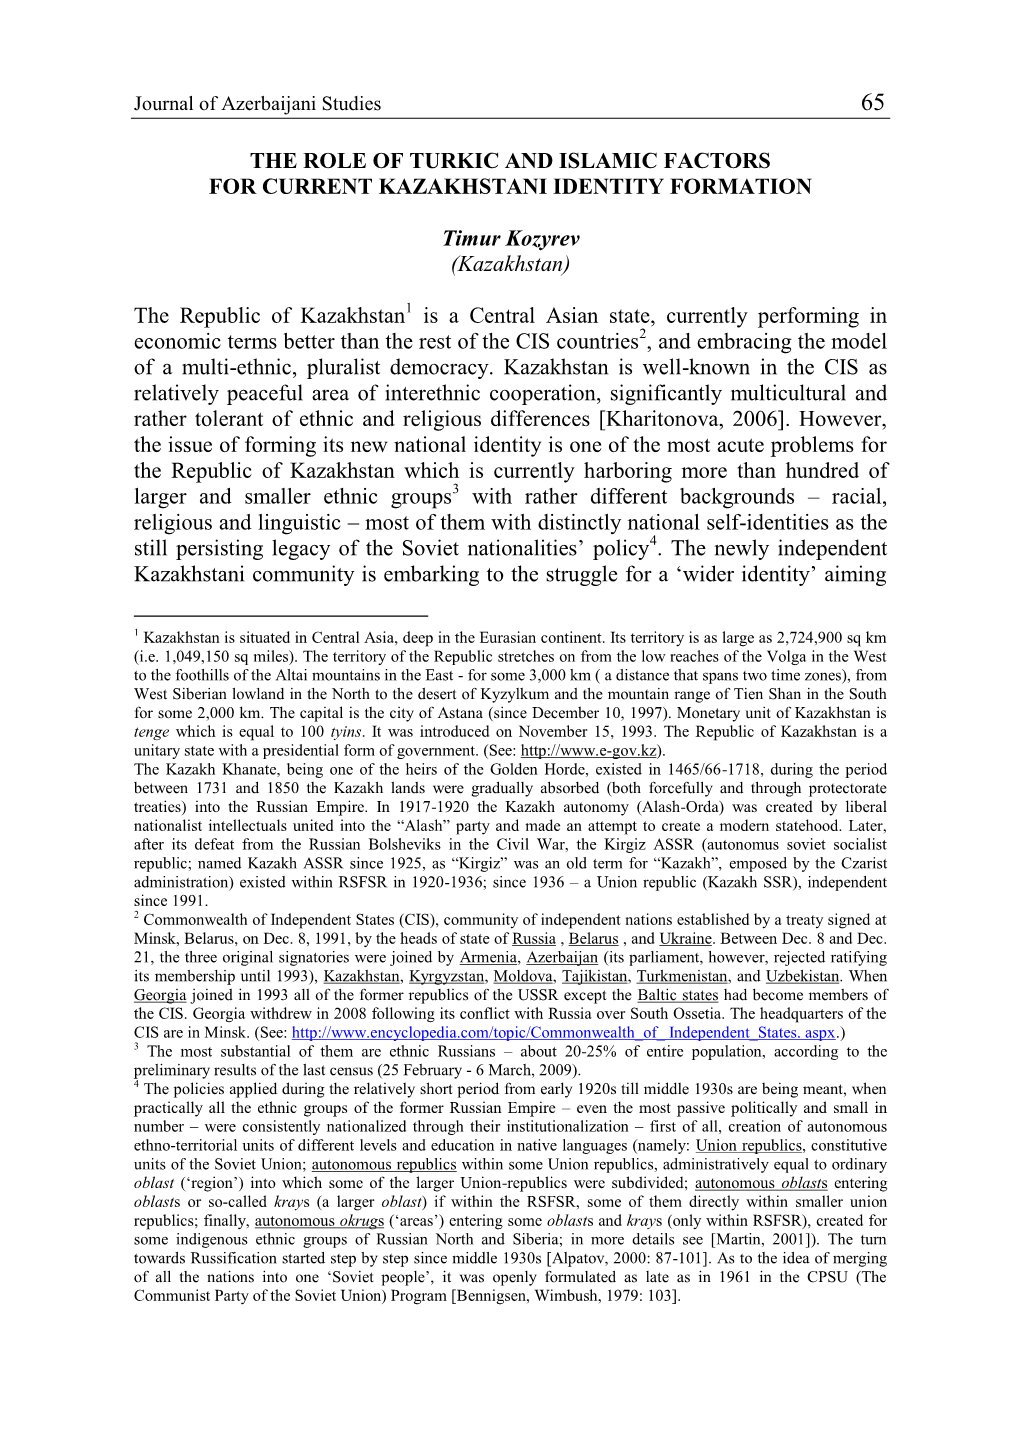 The Role of Turkic and Islamic Factors for Current Kazakhstani Identity Formation